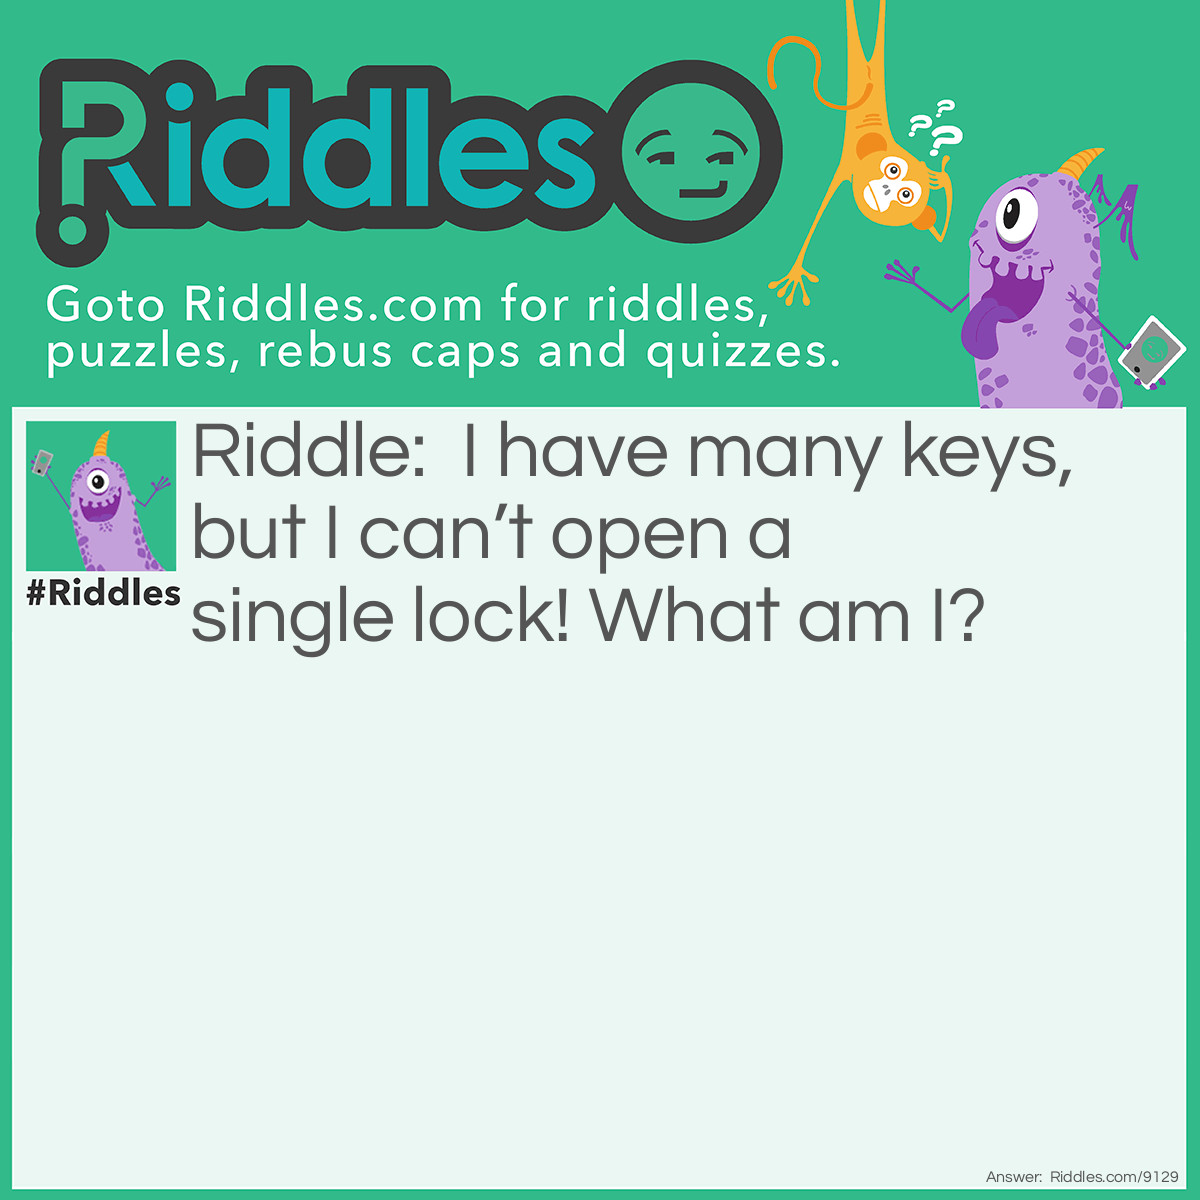 Riddle: I have many keys, but I can't open a single lock! What am I? Answer: A keyboard.